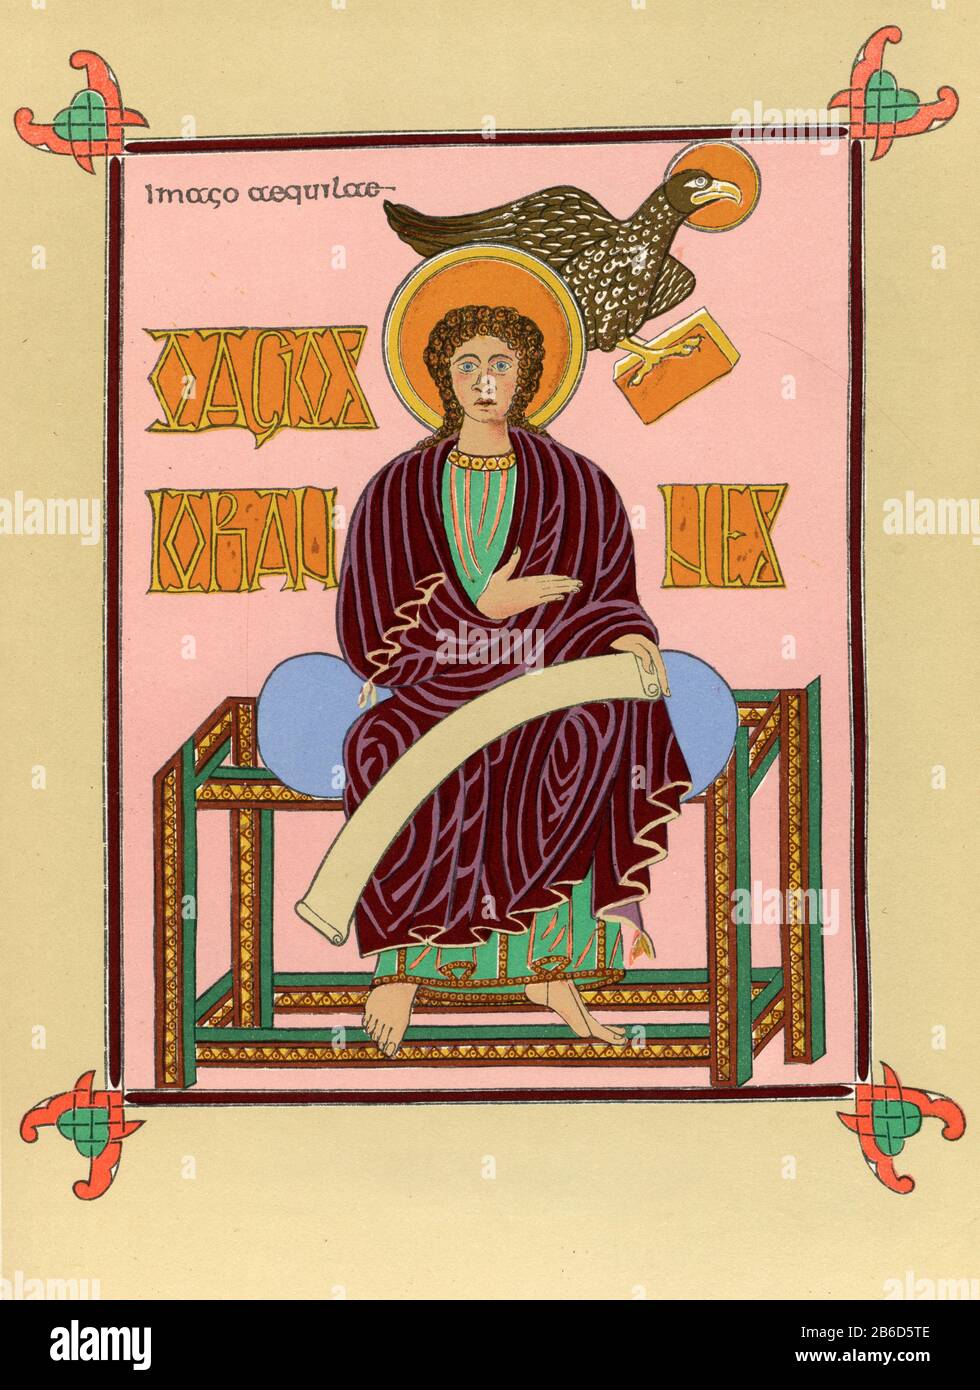 St John the Evangelist: from the Lindisfarne Gospels, c720. By Eadfrith of Lindisfarne (d721). The Lindisfarne Gospels is an illuminated manuscript gospel book produced in the monastery at Lindisfarne, off the coast of Northumberland, England. The manuscript is one of the finest works in the unique style of Hiberno-Saxon or Insular art and combines Mediterranean, Anglo-Saxon and Celtic elements. London, British Library Cotton MS Nero D.IV. Stock Photo